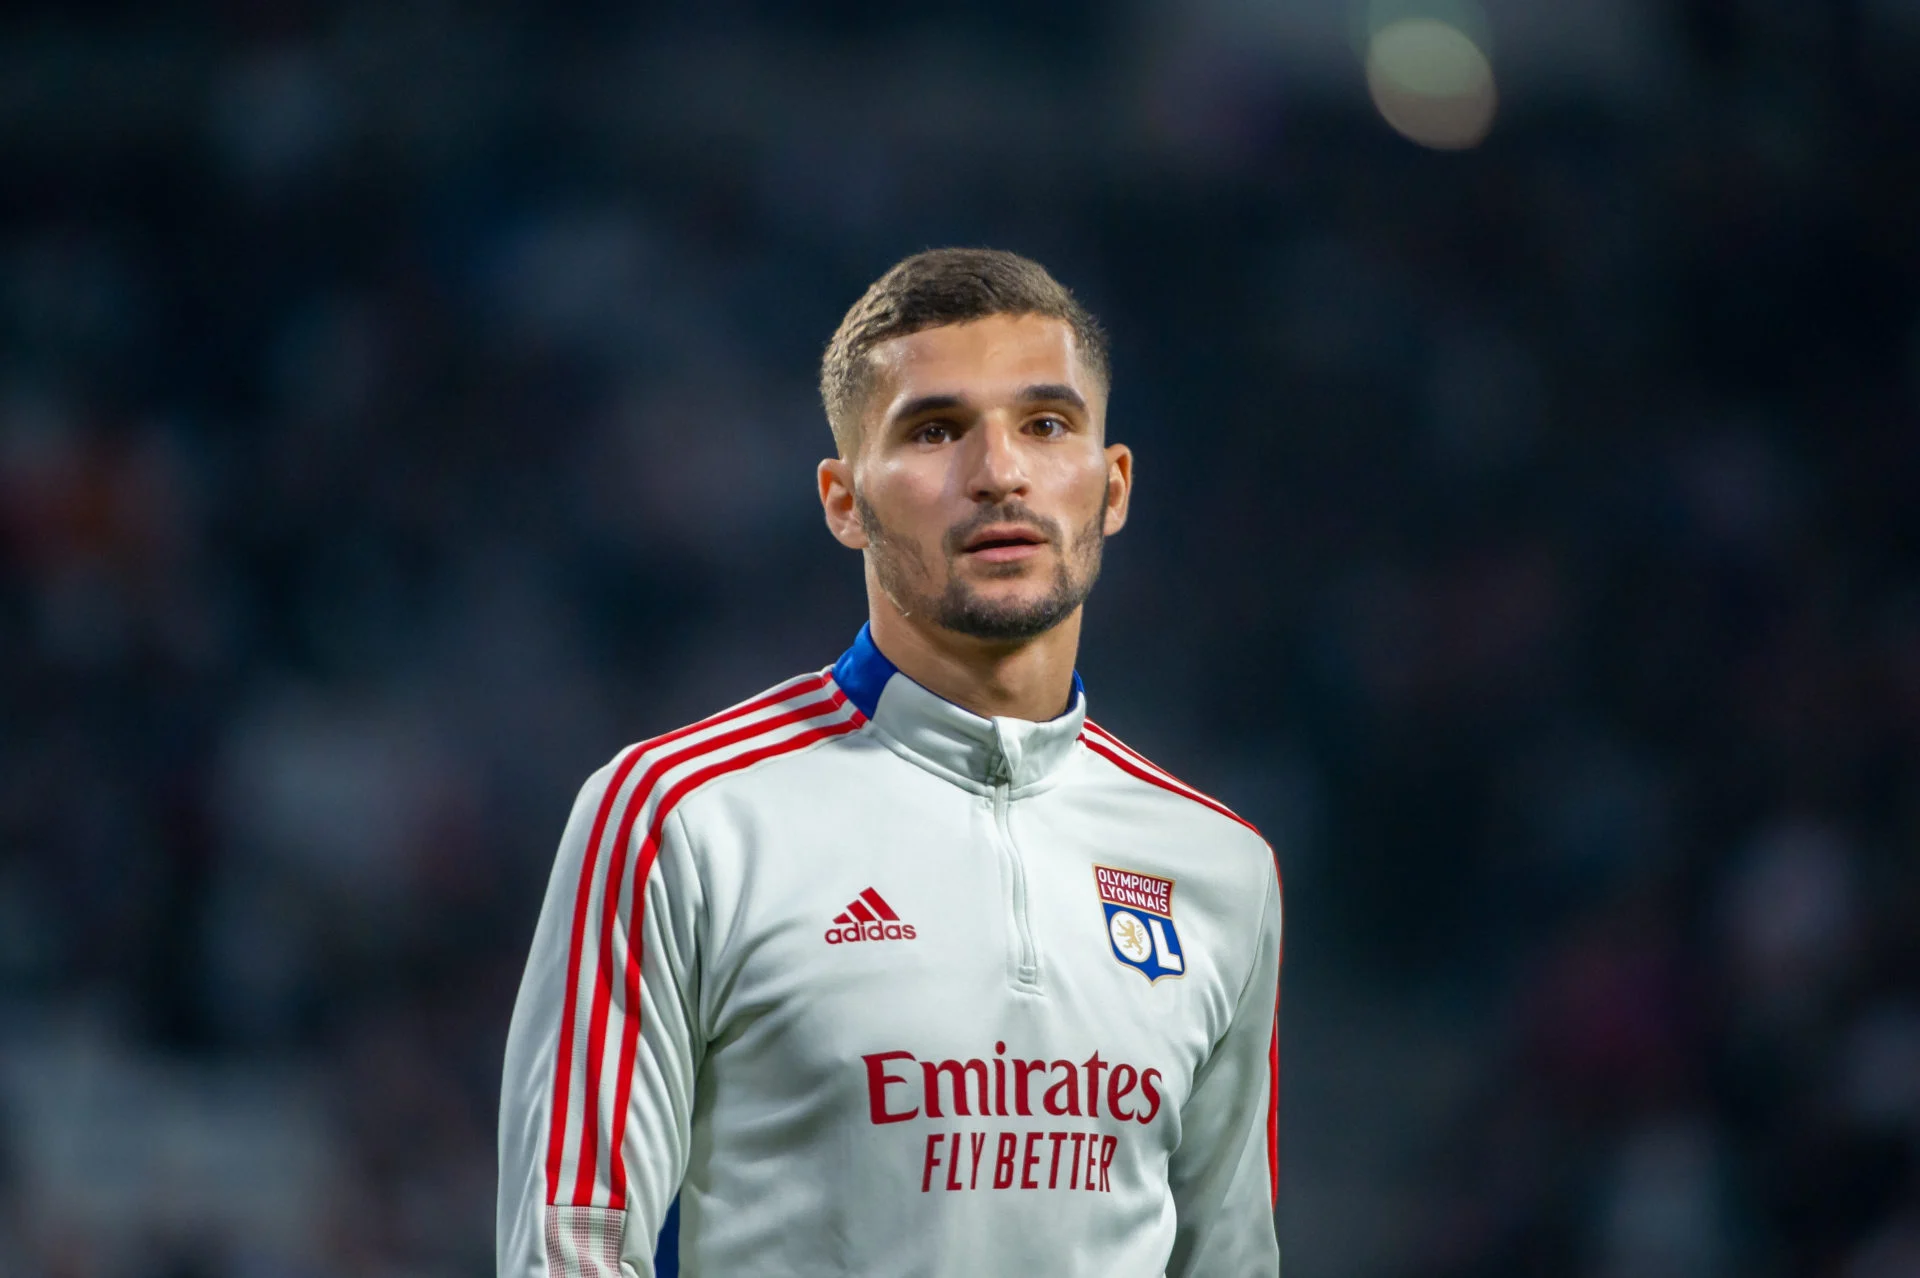 Roma brought in Houssem Aouar for medicals on Easter Monday, but they had yet to fully come to terms at the time. The parties finalized the agreement.